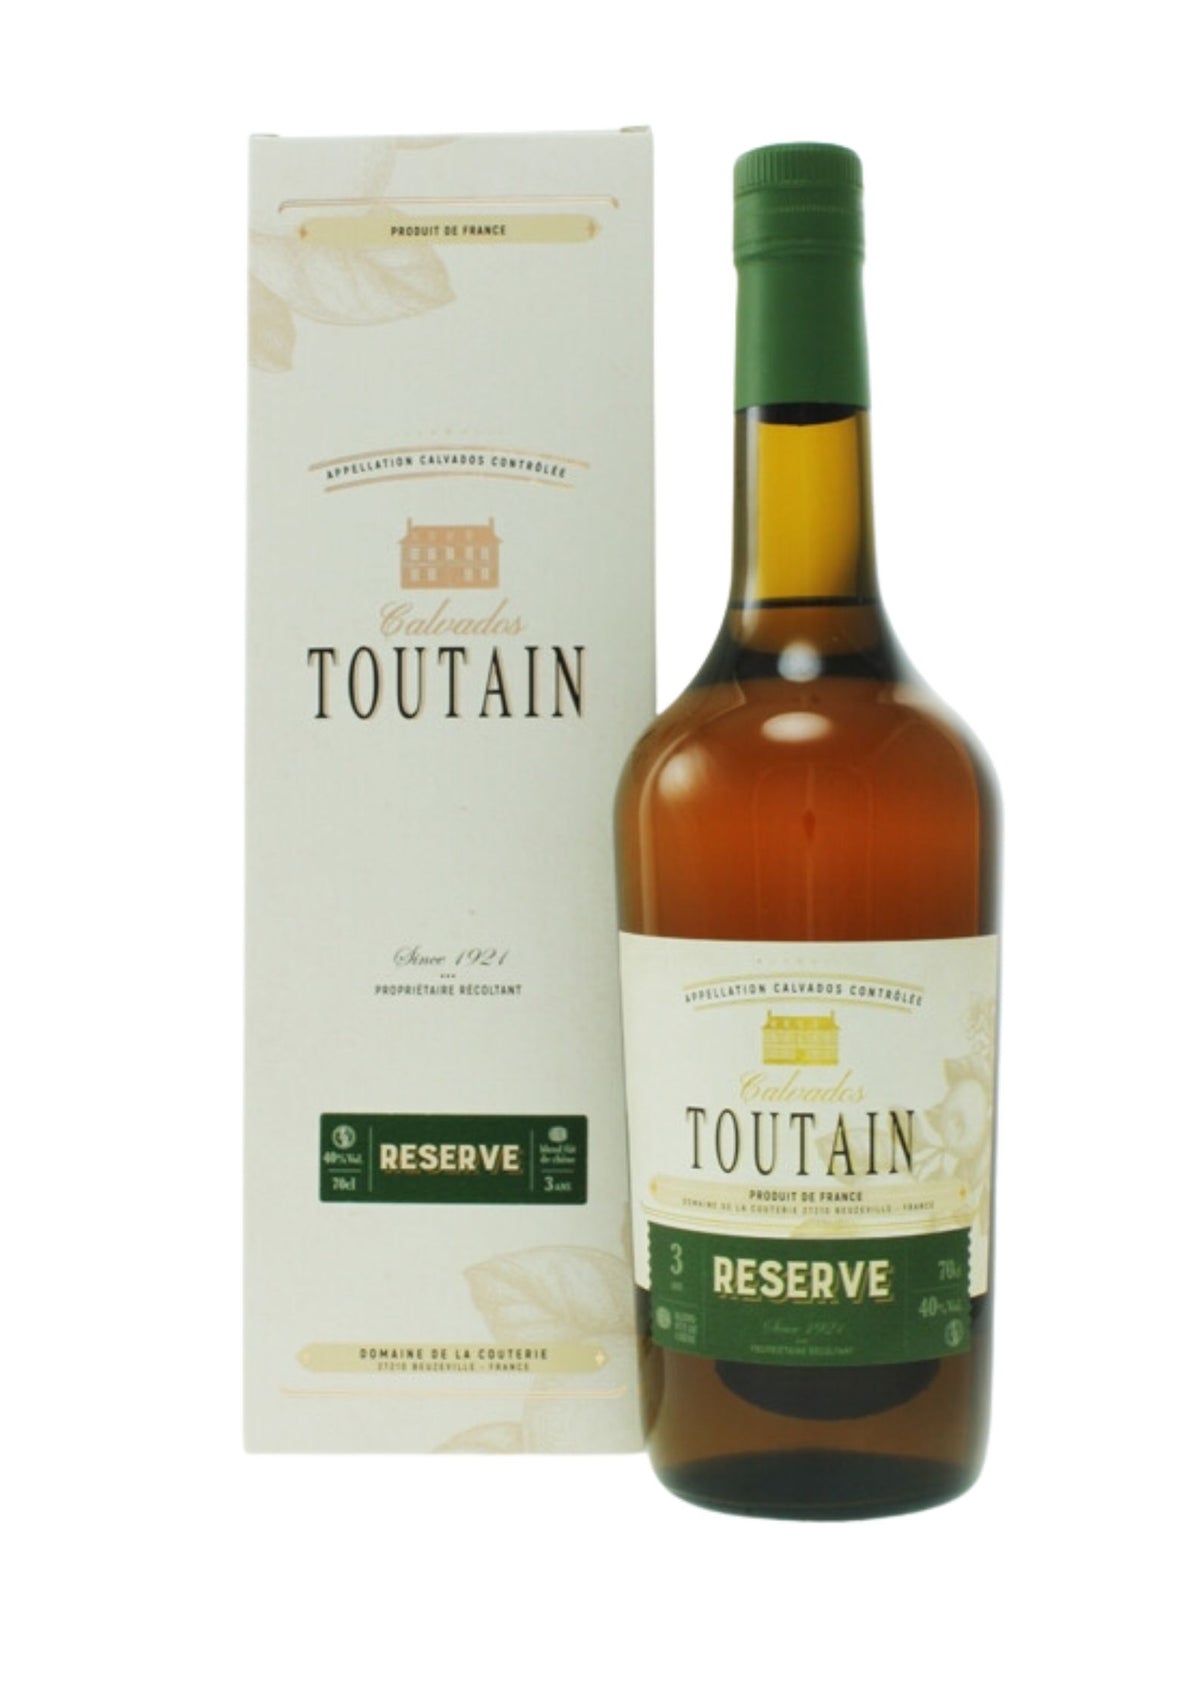 Toutain 3-Year-Old Reserve Calvados, 40%